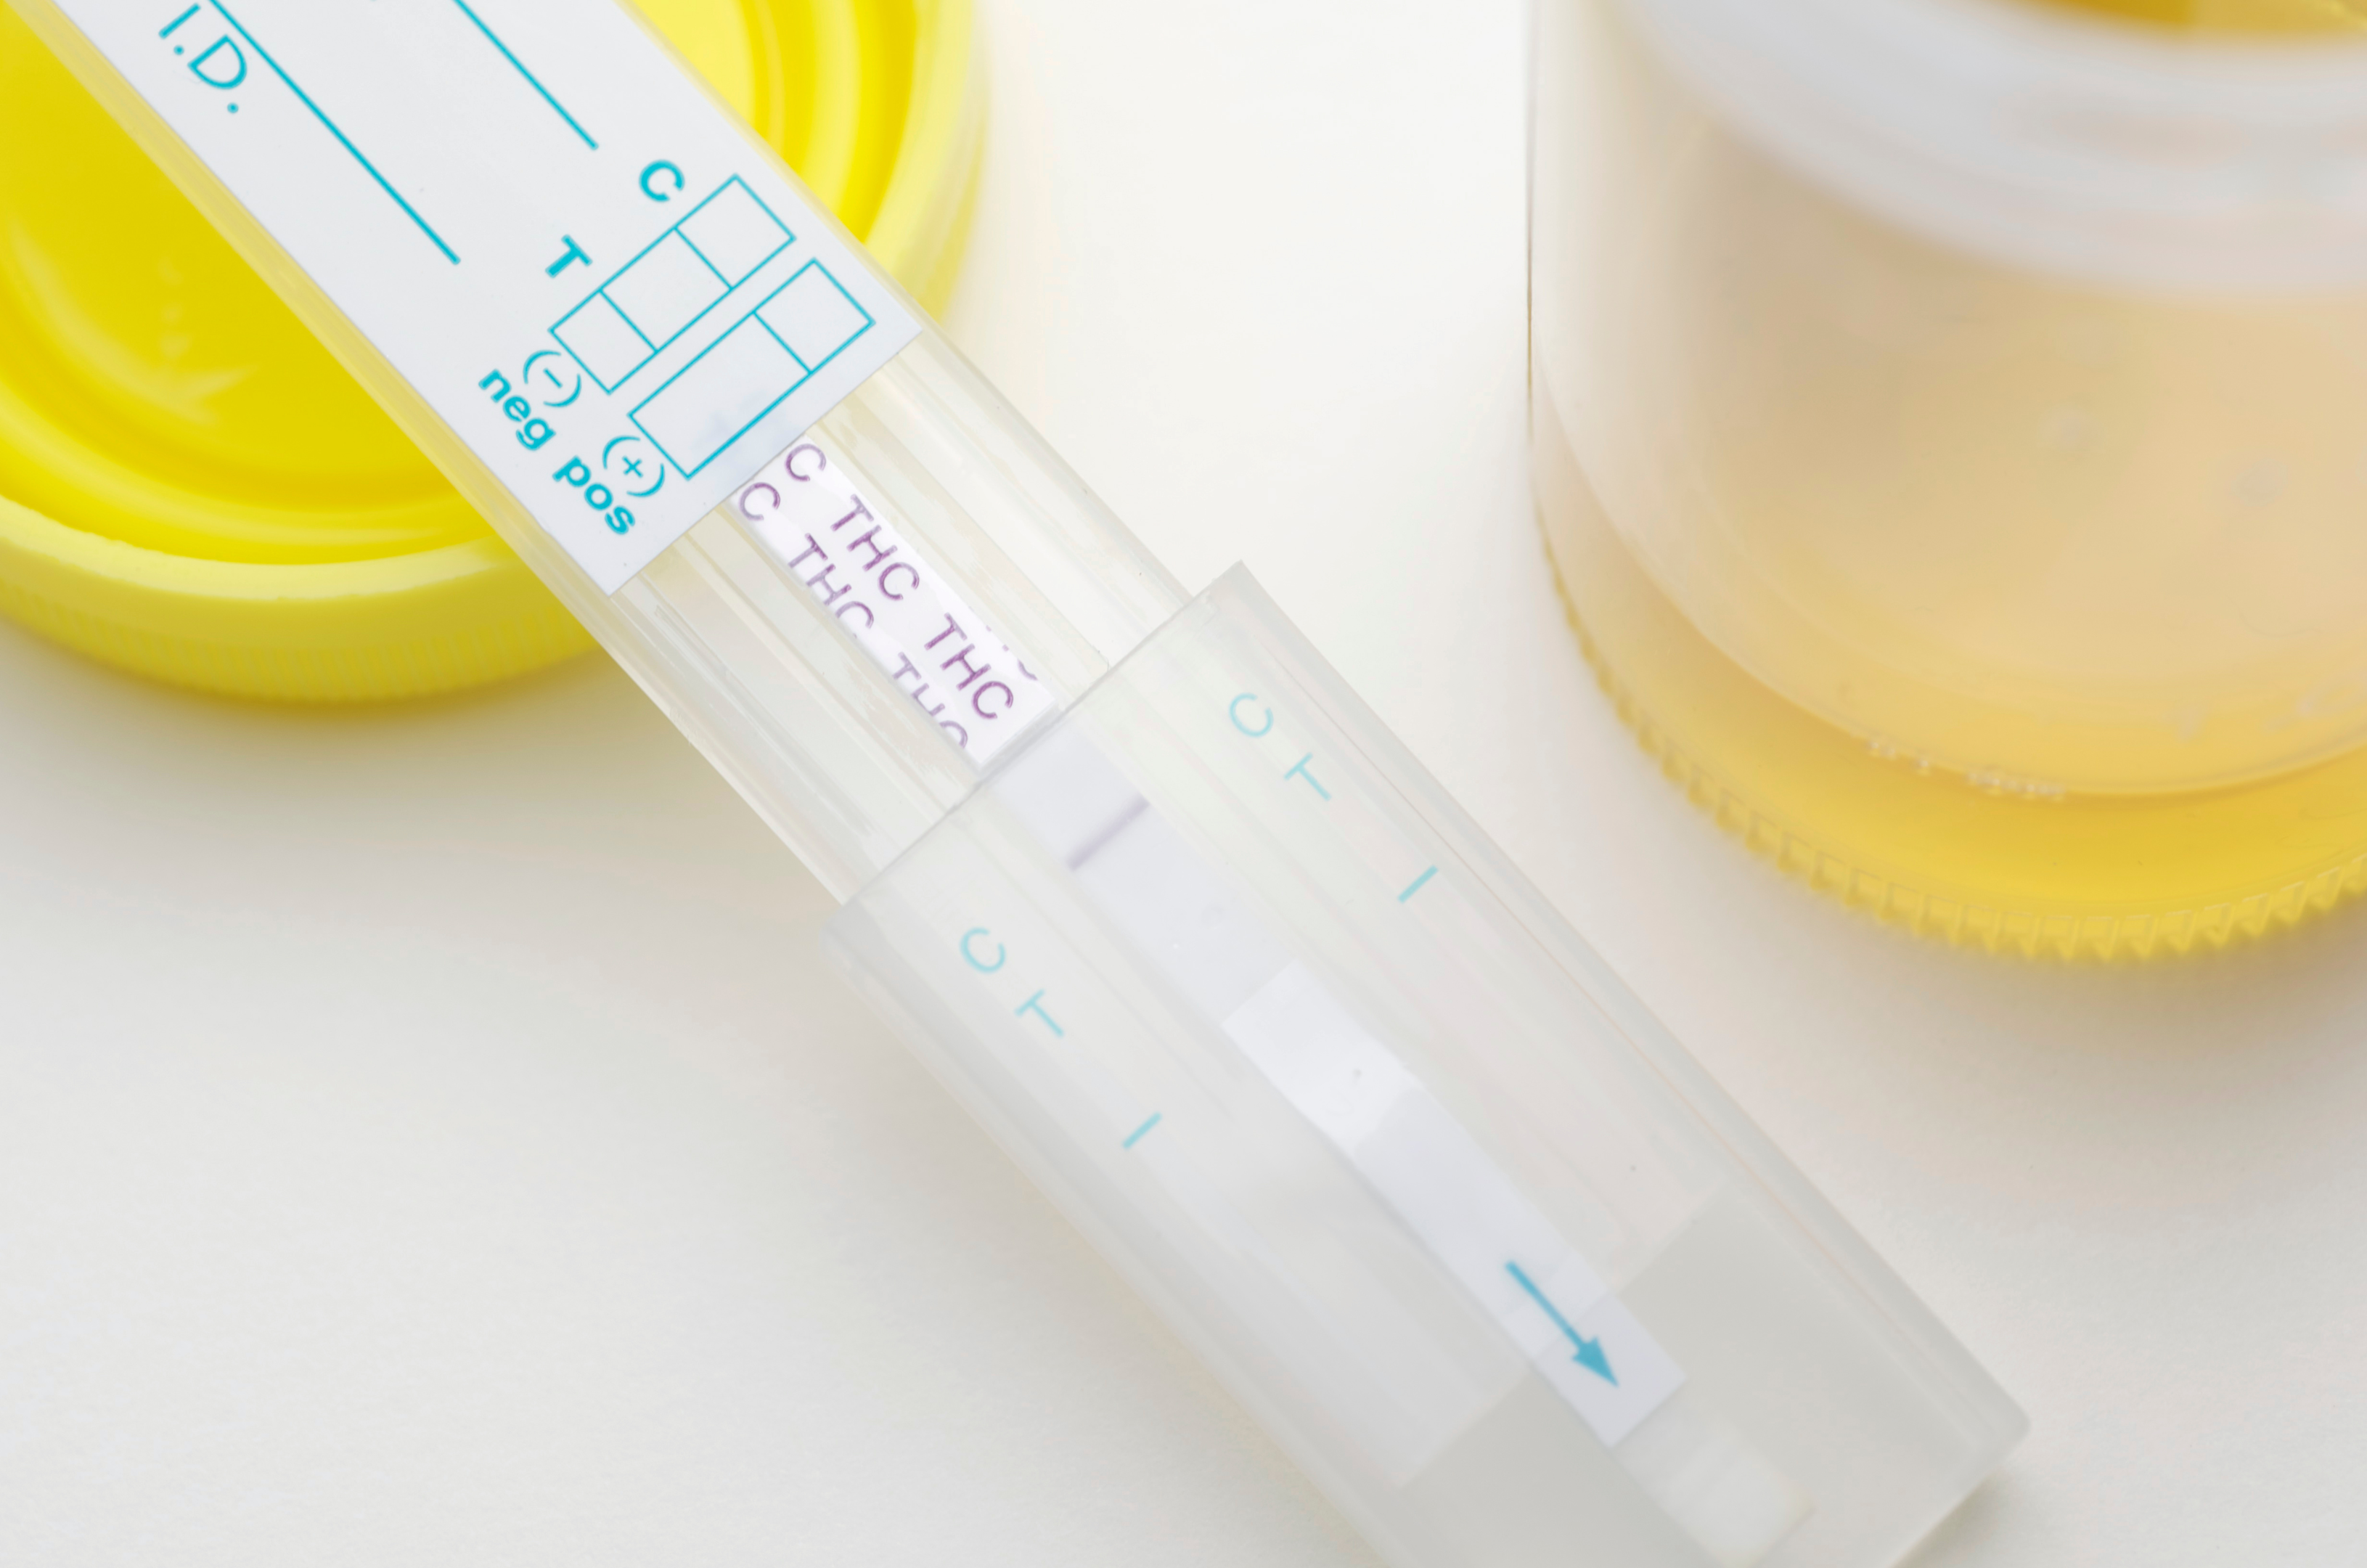 If you're up for a drug test soon, it's best to stay away from any THC product. Even though Delta 8 is legal federally, you may still test positive on a drug test. Hold off on any Delta 8 consumption until after you're tested.